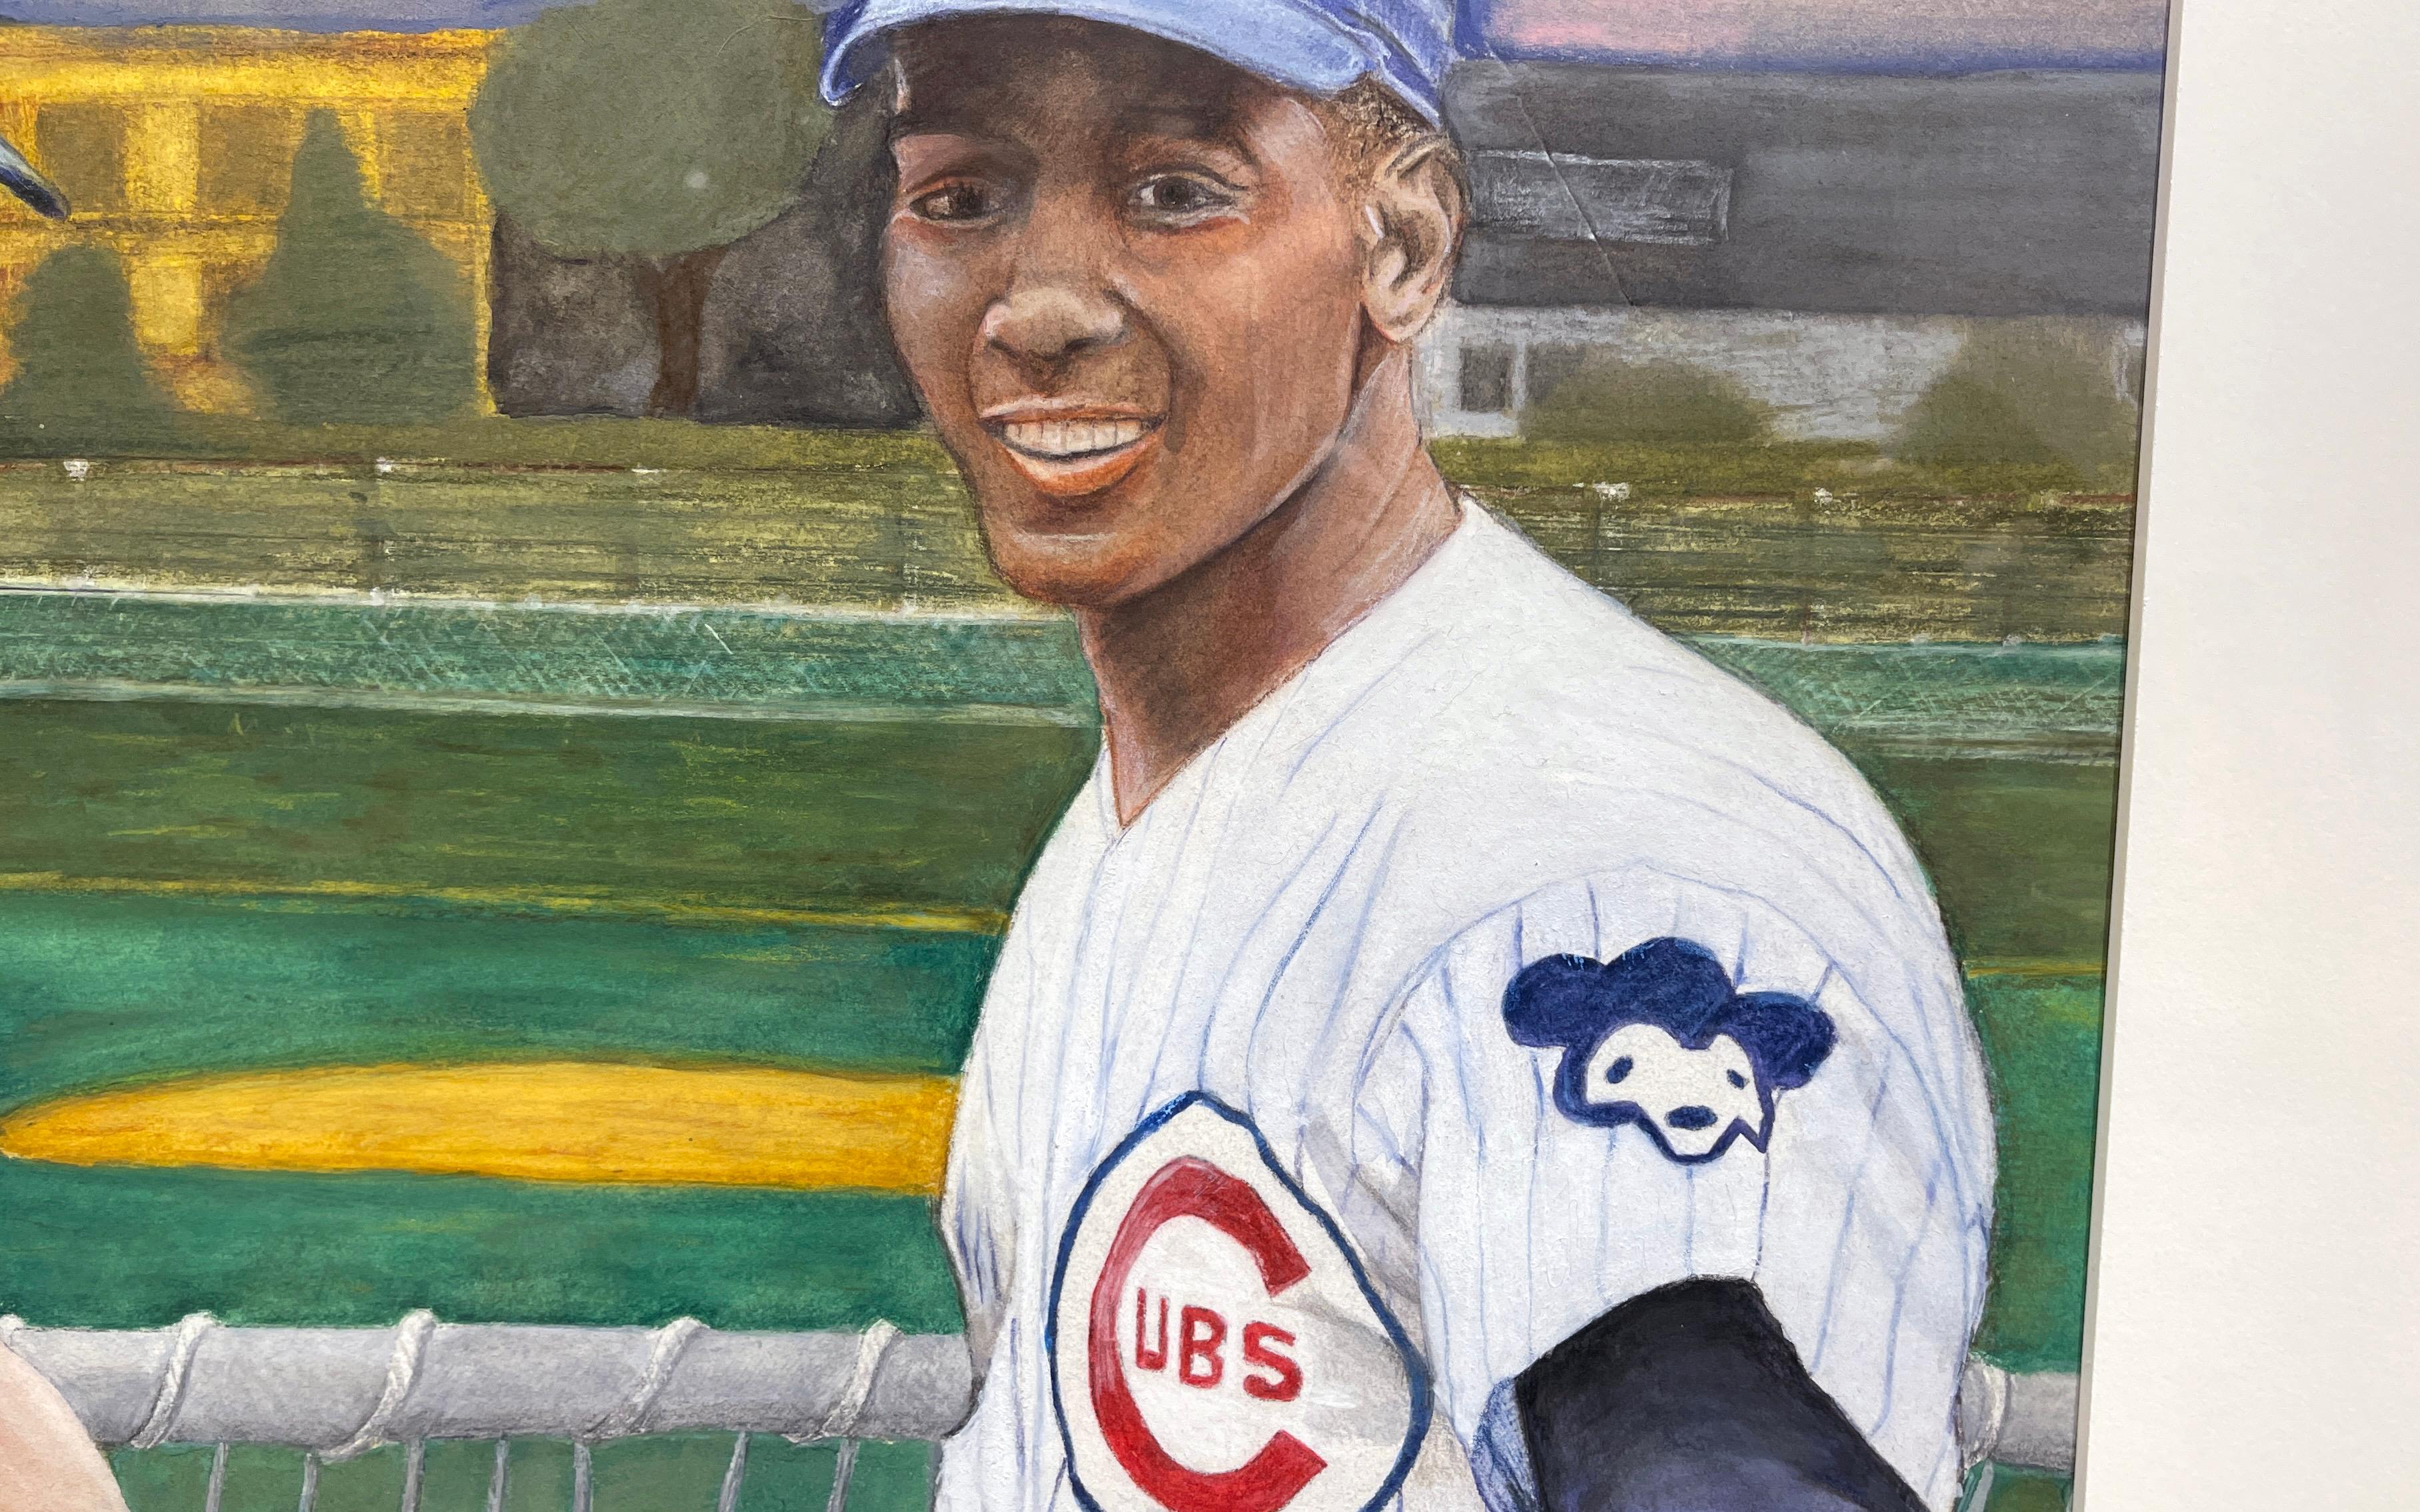 Ron Santo was an American Major League Baseball third baseman who played for the Chicago Cubs from 1960 through 1973 and the Chicago White Sox in 1974   Hall of fame induction: 2012

Ernest Banks, nicknamed 